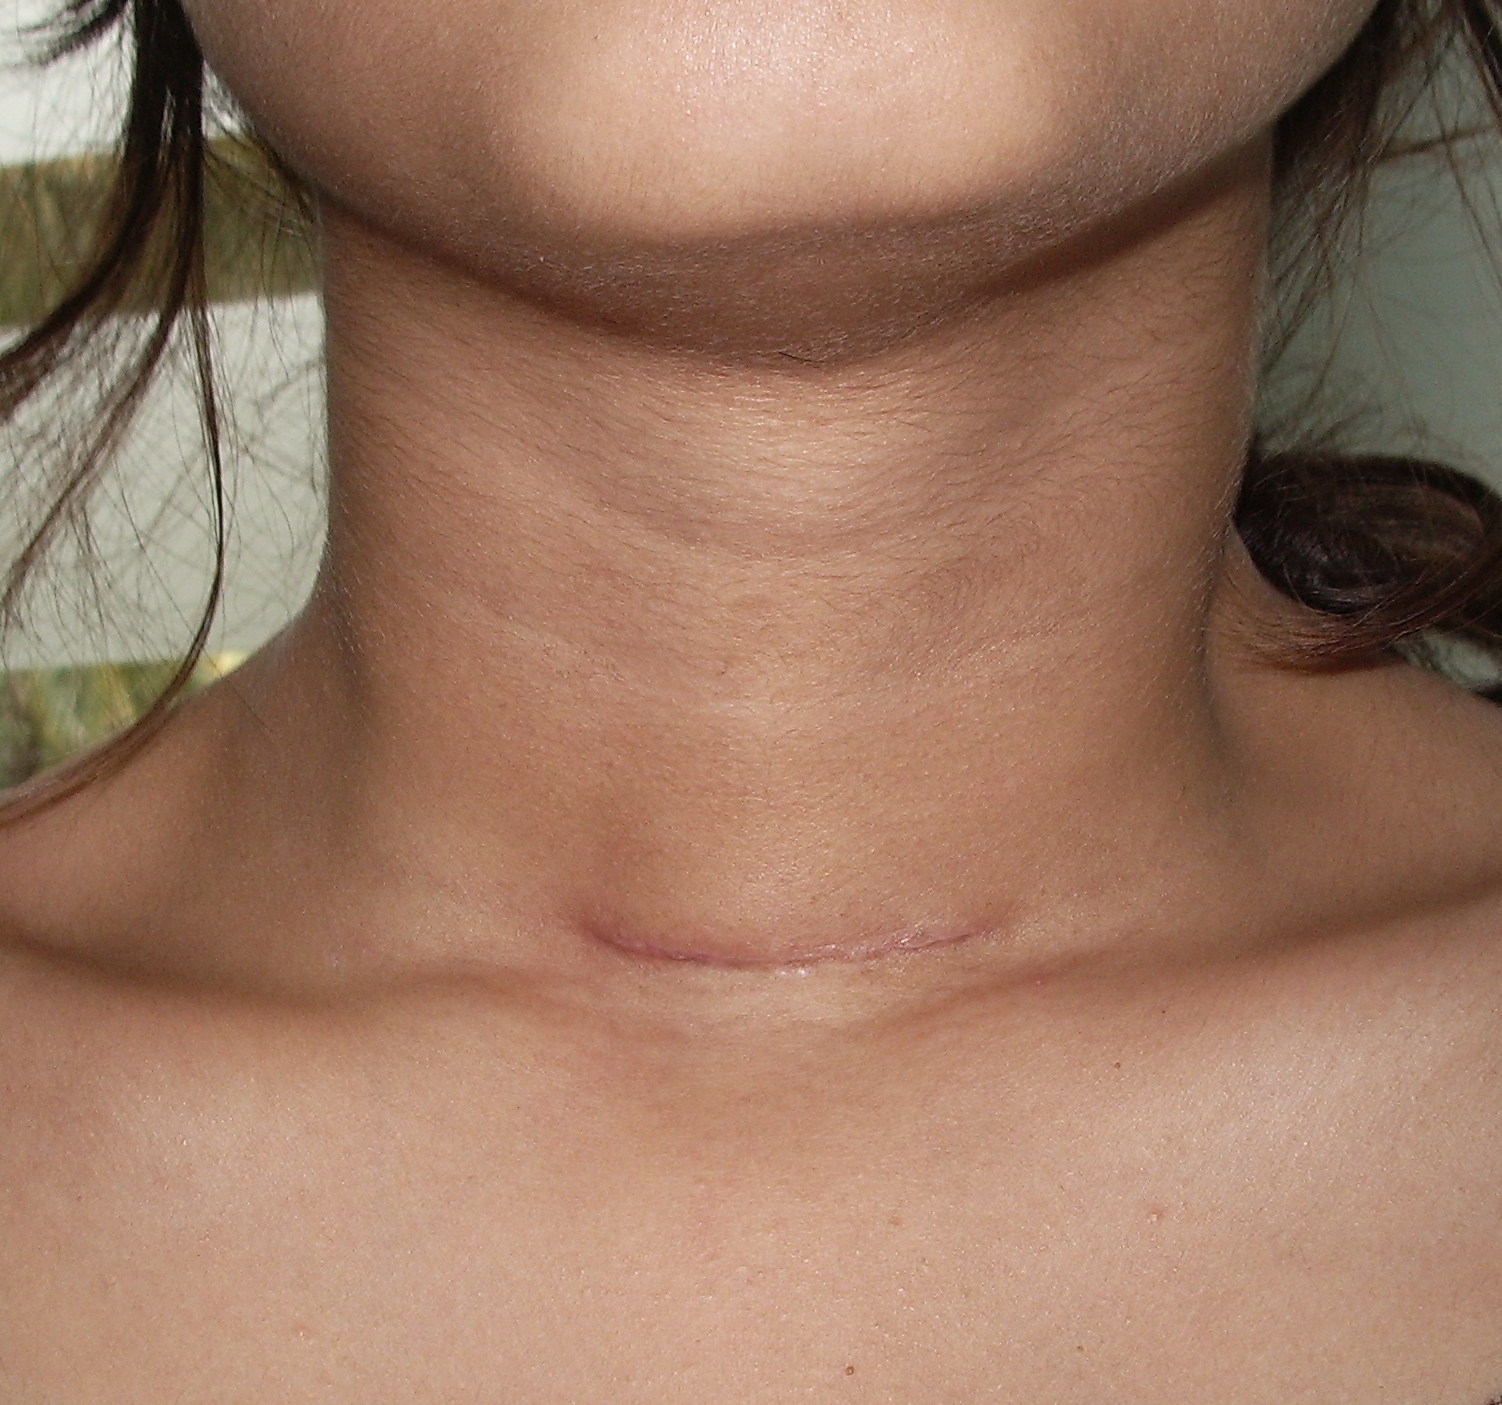 Thyroidectomy scar - one month after surgery